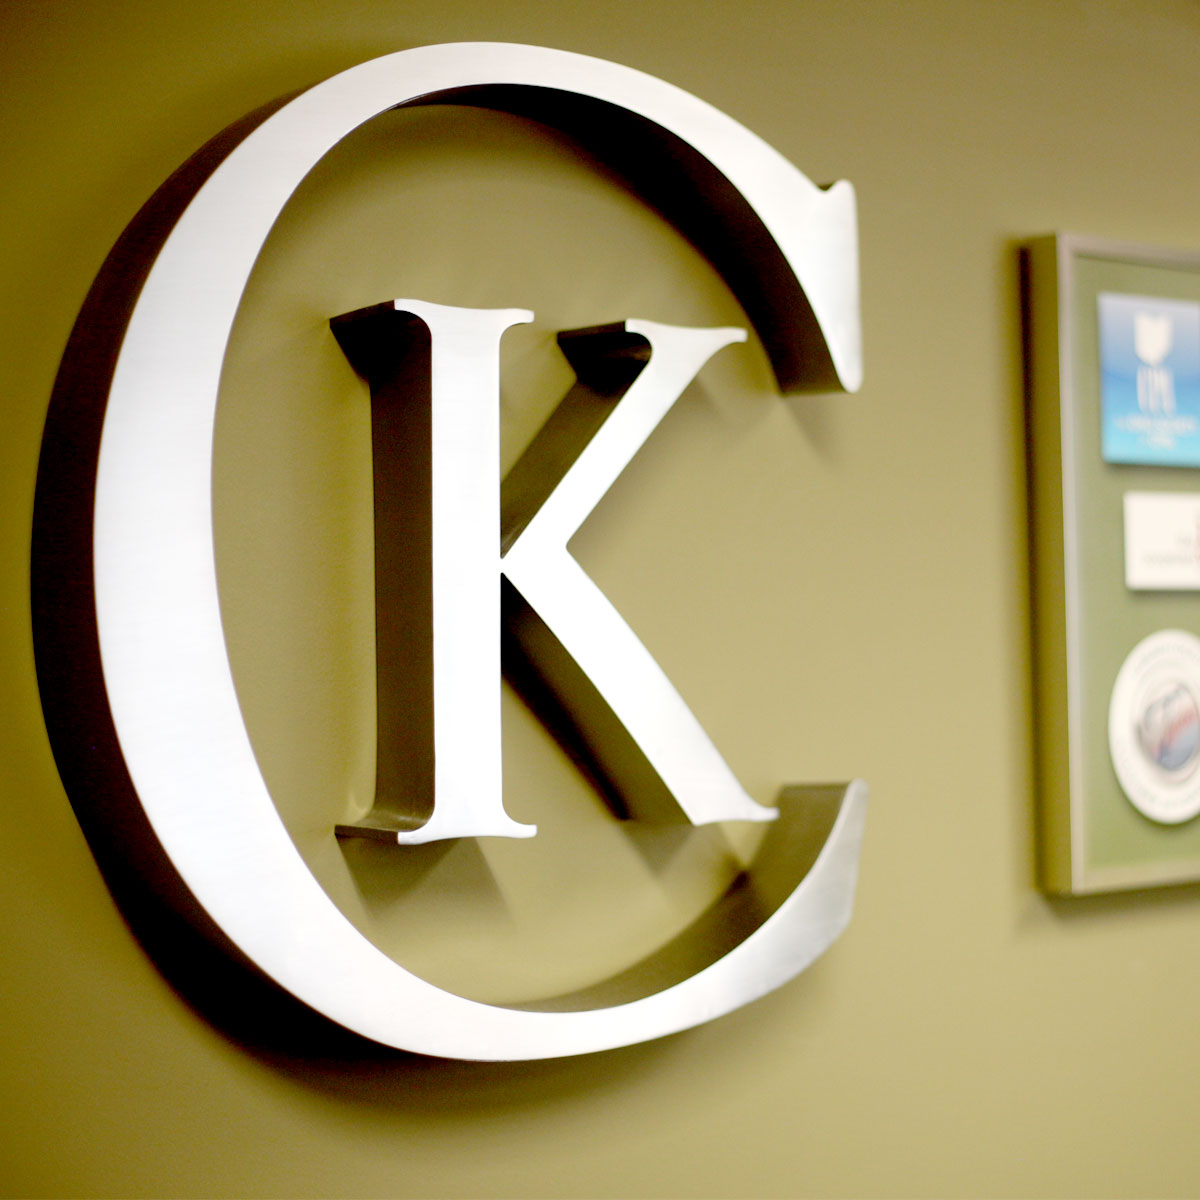 Photo of a 3D logo of the letters CK, the abbreviated form of the Corrigan Krause Logo